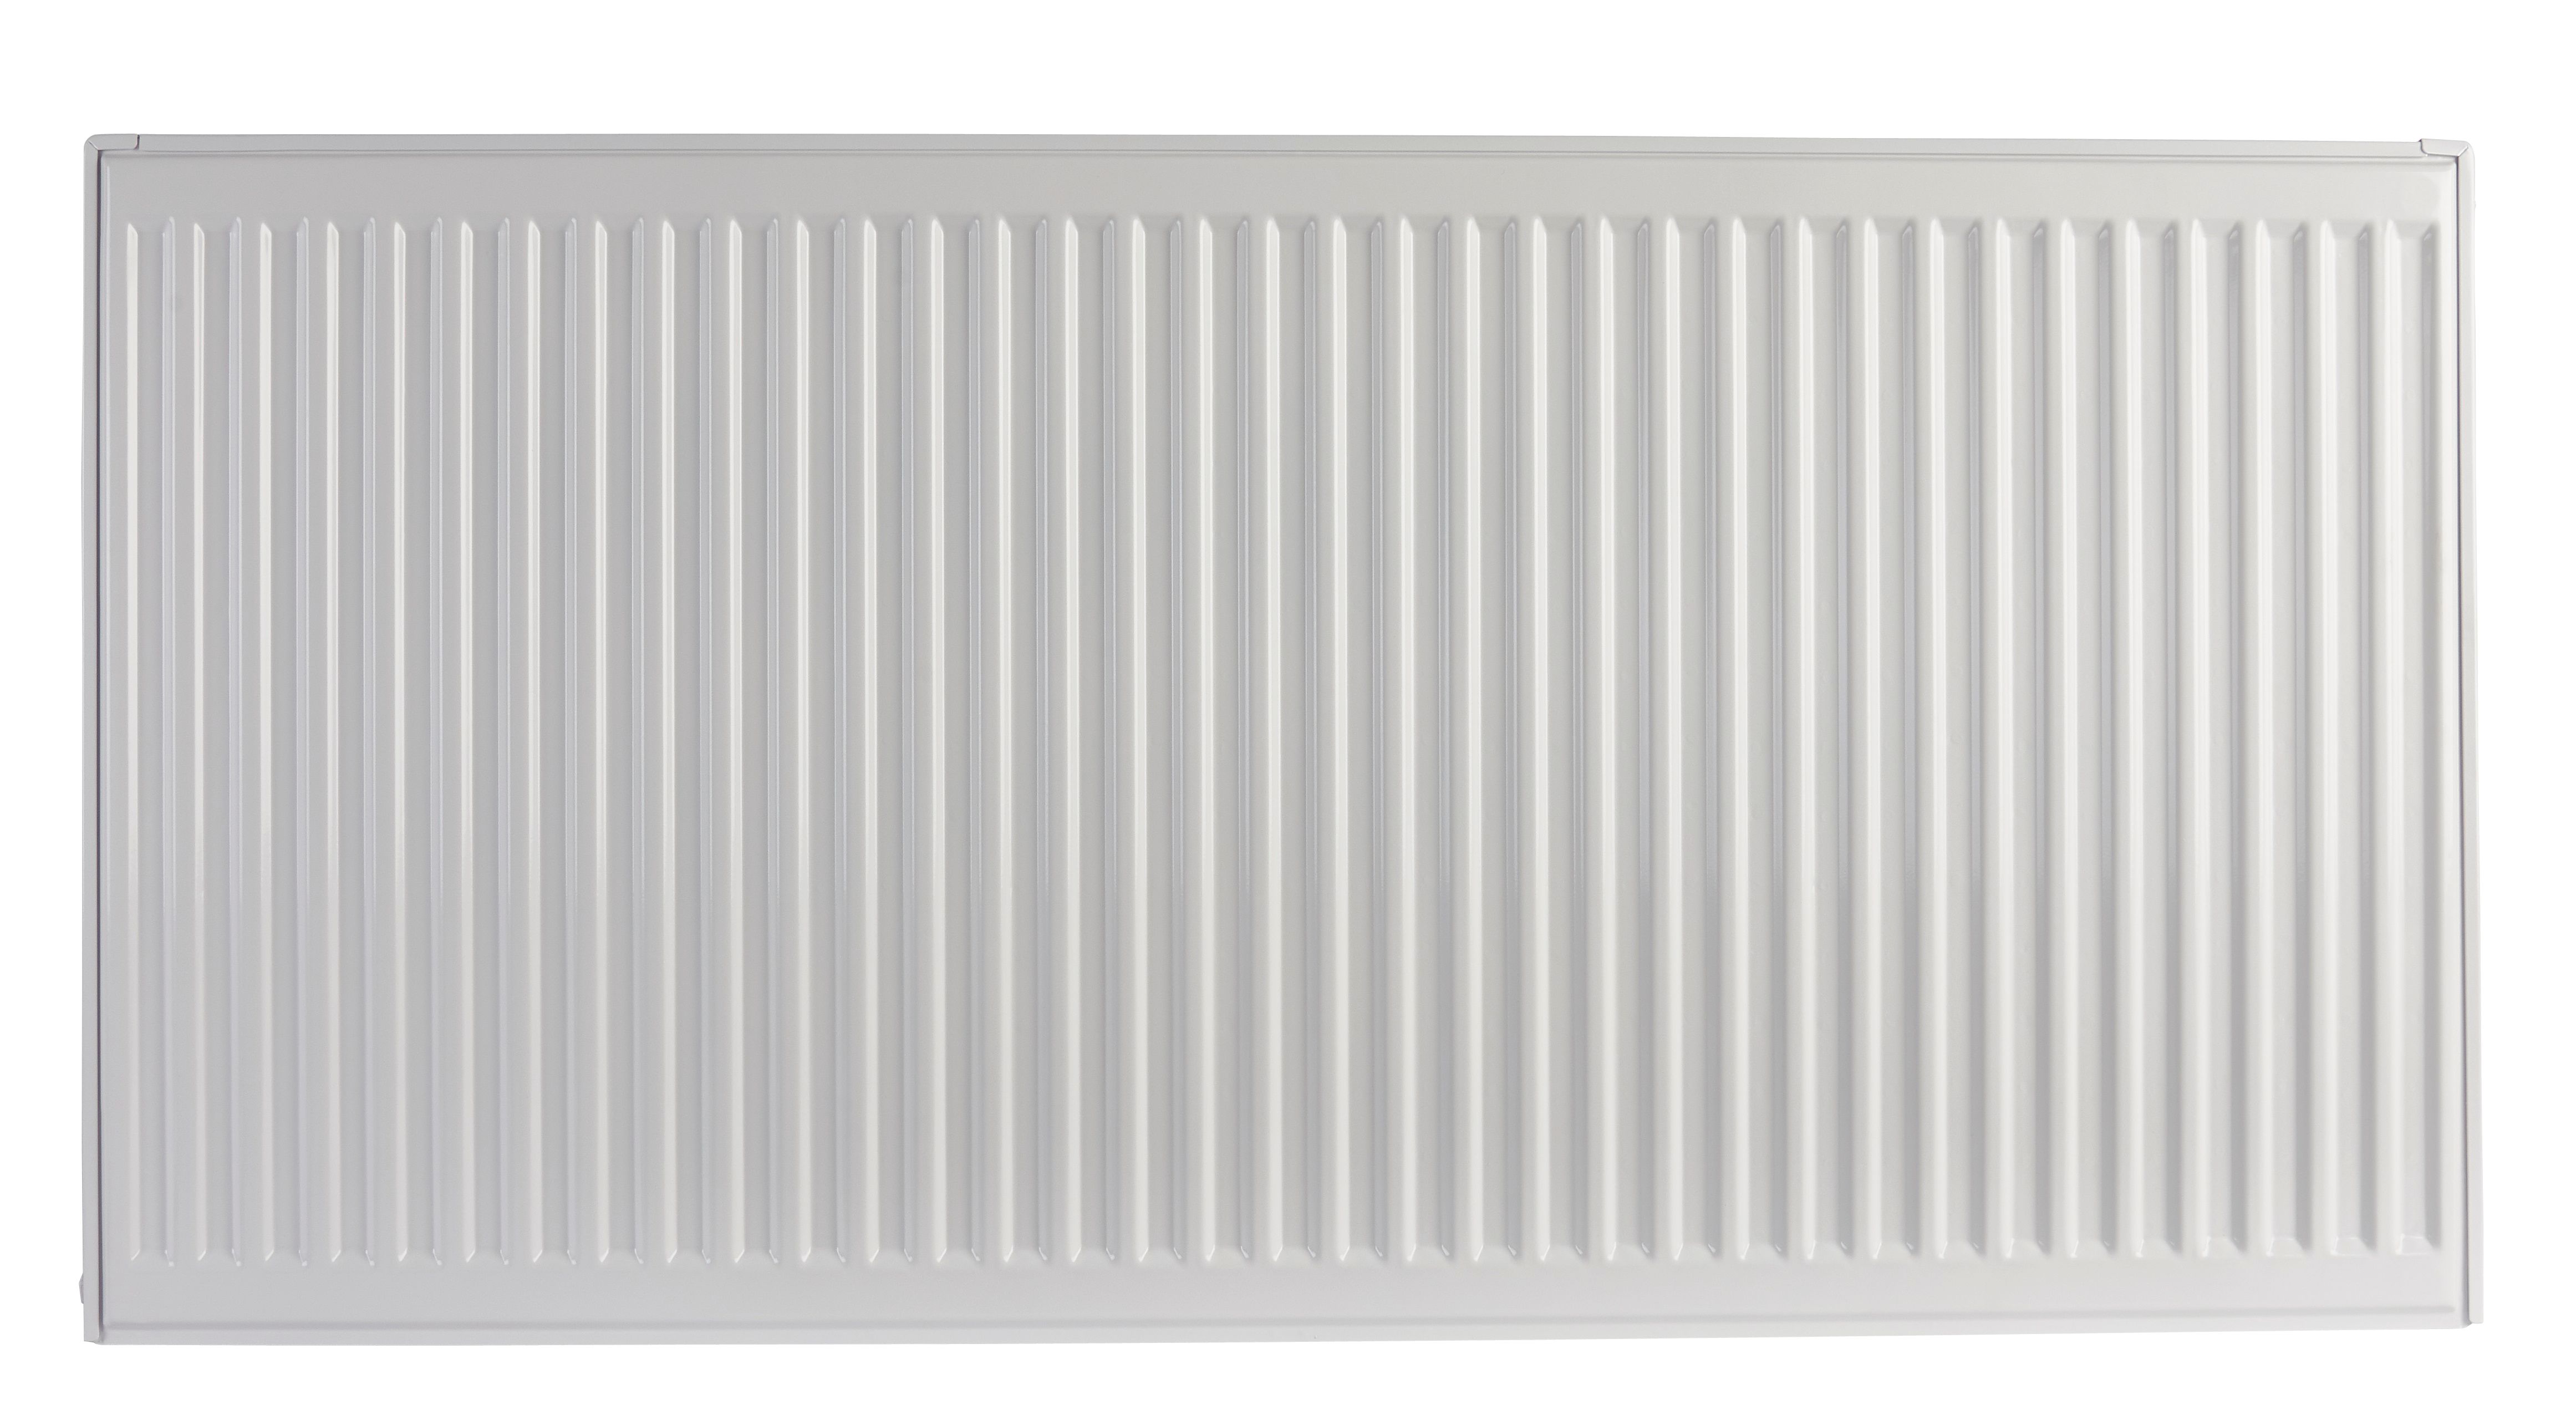 Image of Homeline by Stelrad 600 x 1400mm Type 21 Double Panel Plus Single Convector Radiator